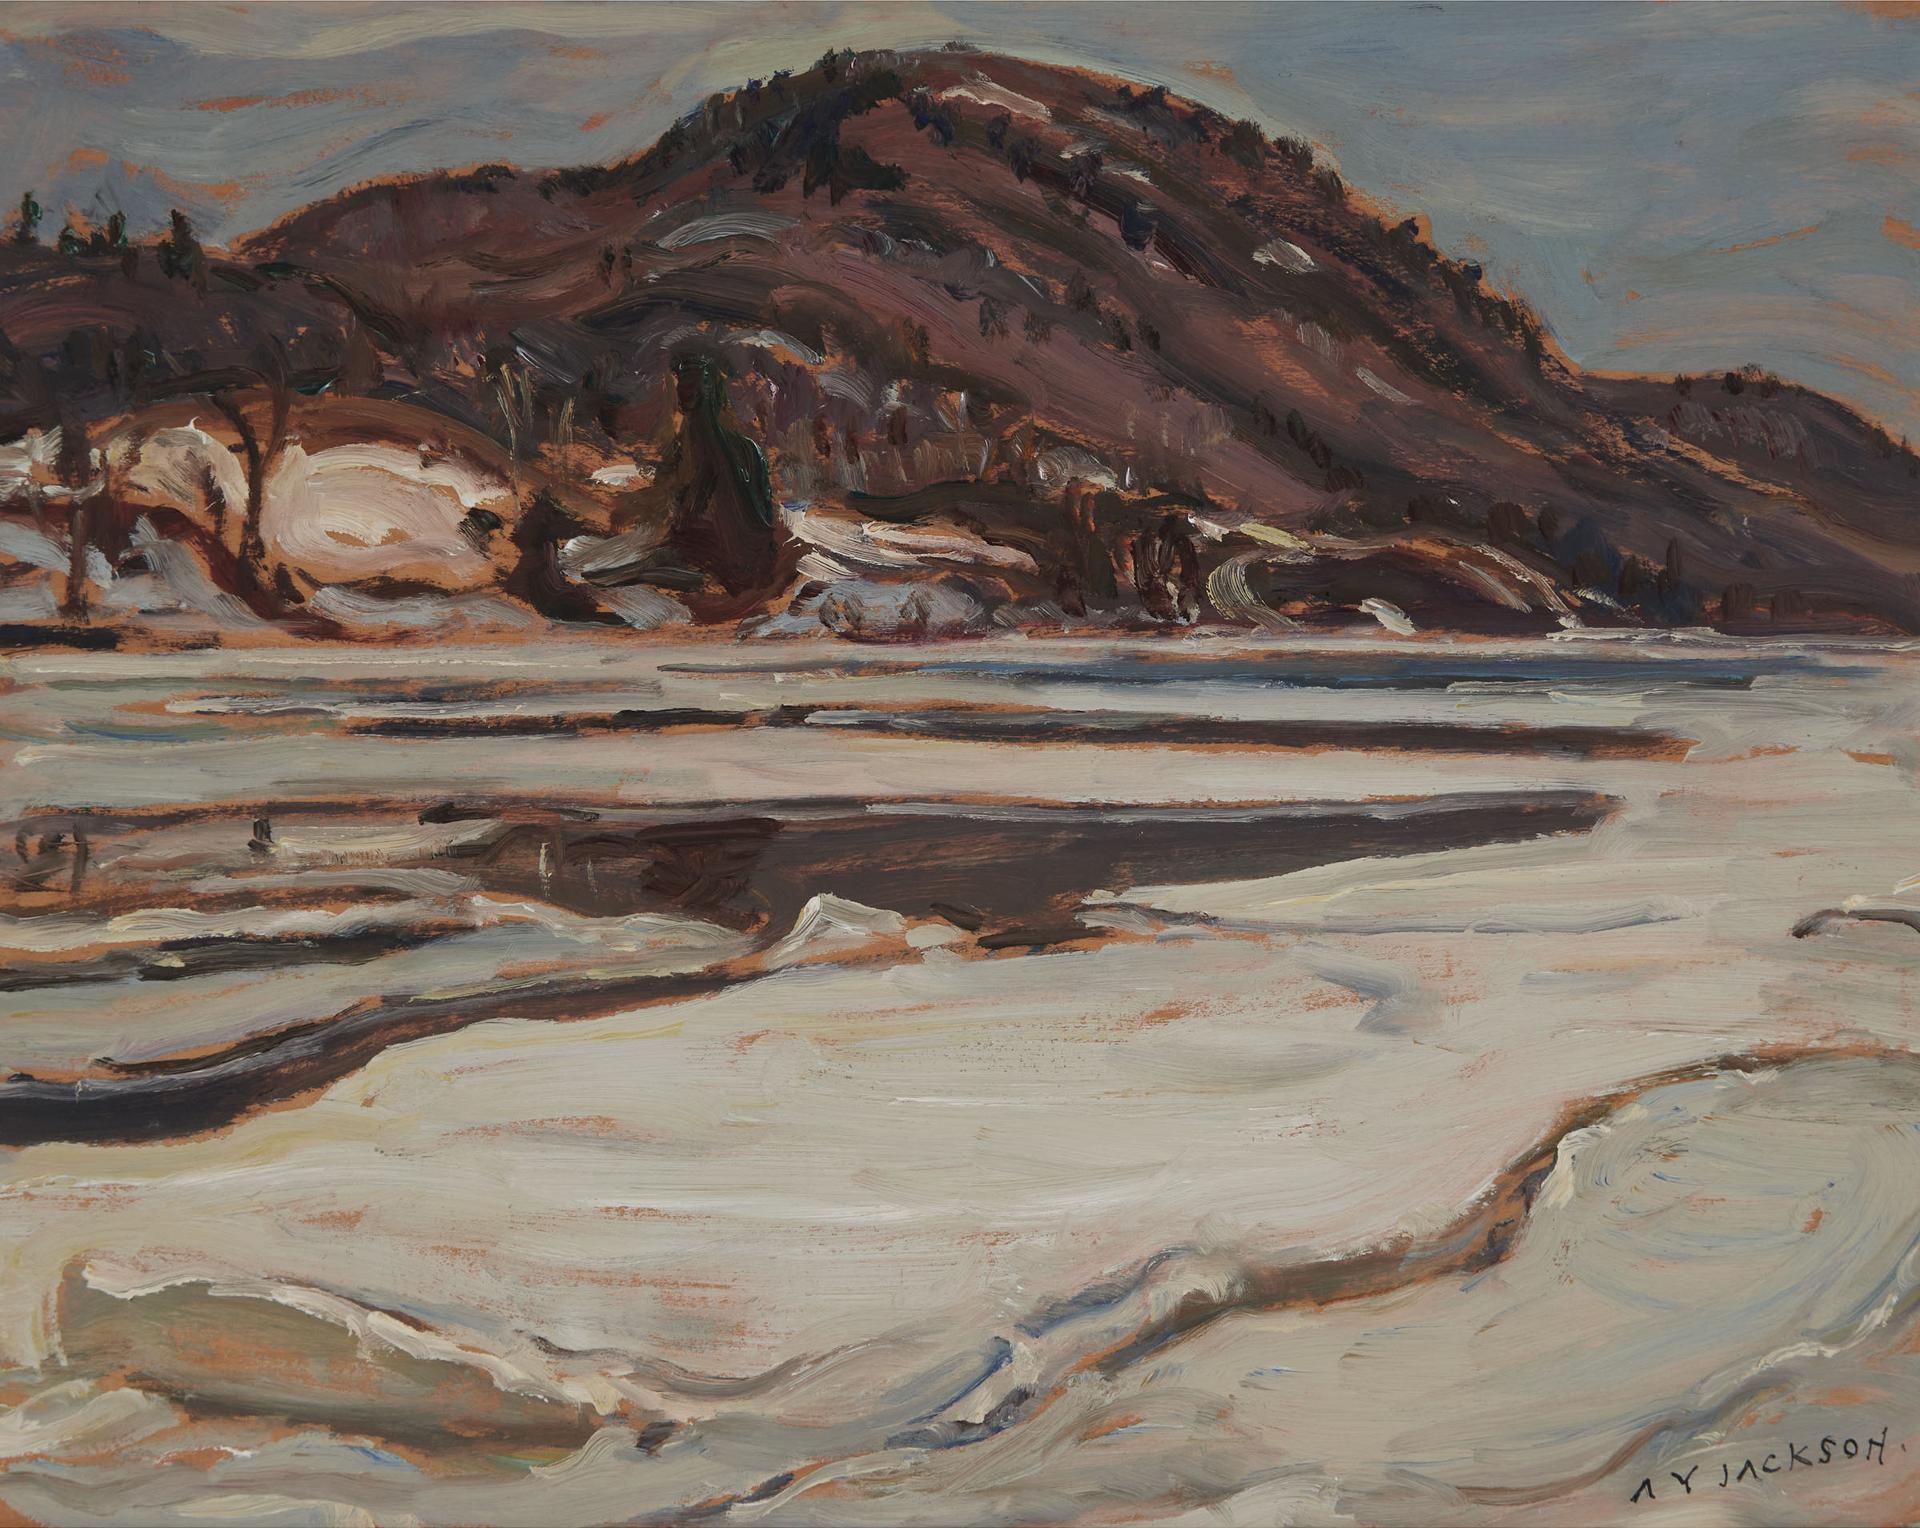 Alexander Young (A. Y.) Jackson (1882-1974) - Early Spring Lièvre River, 1963